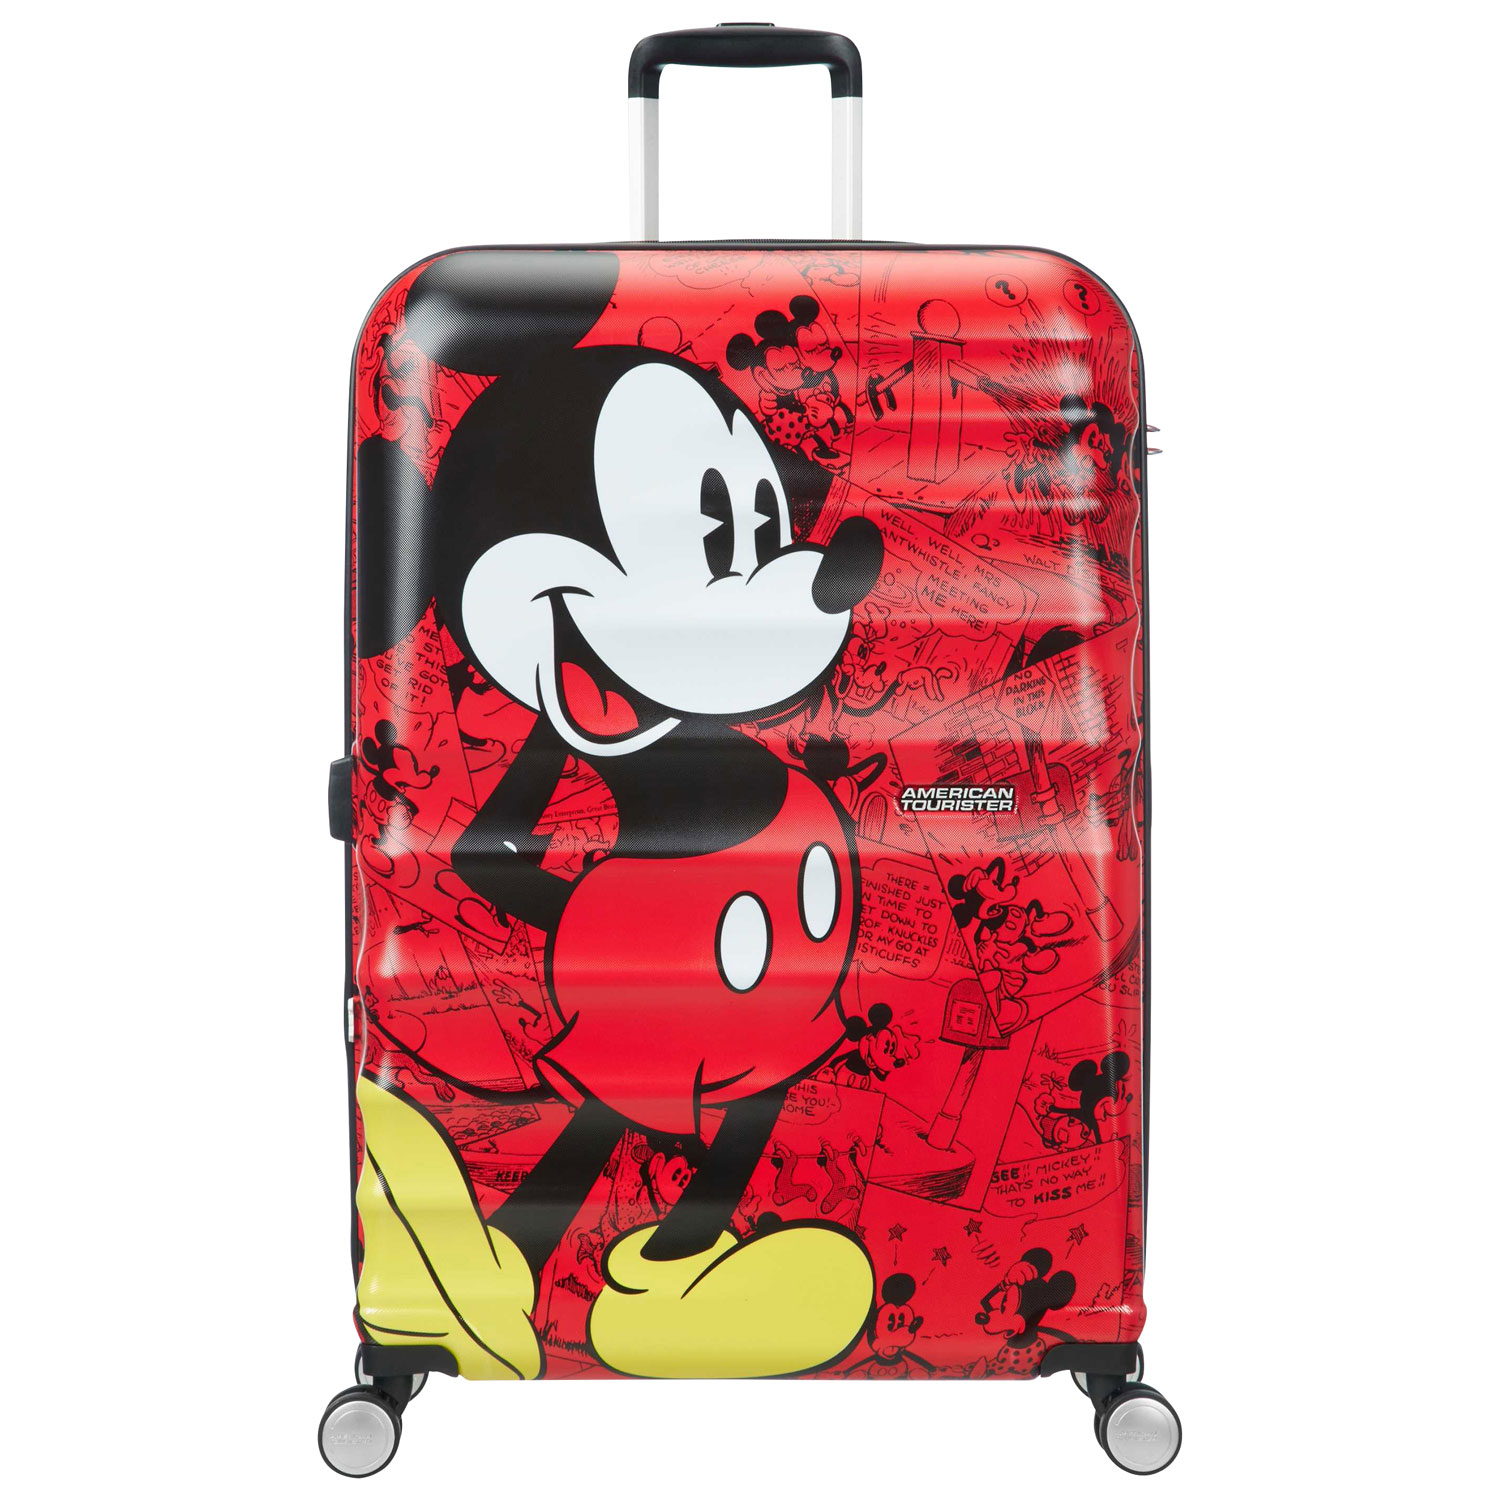 American Tourister Disney Wavebreaker 29" Hard Side Luggage - Red/Mickey Mouse